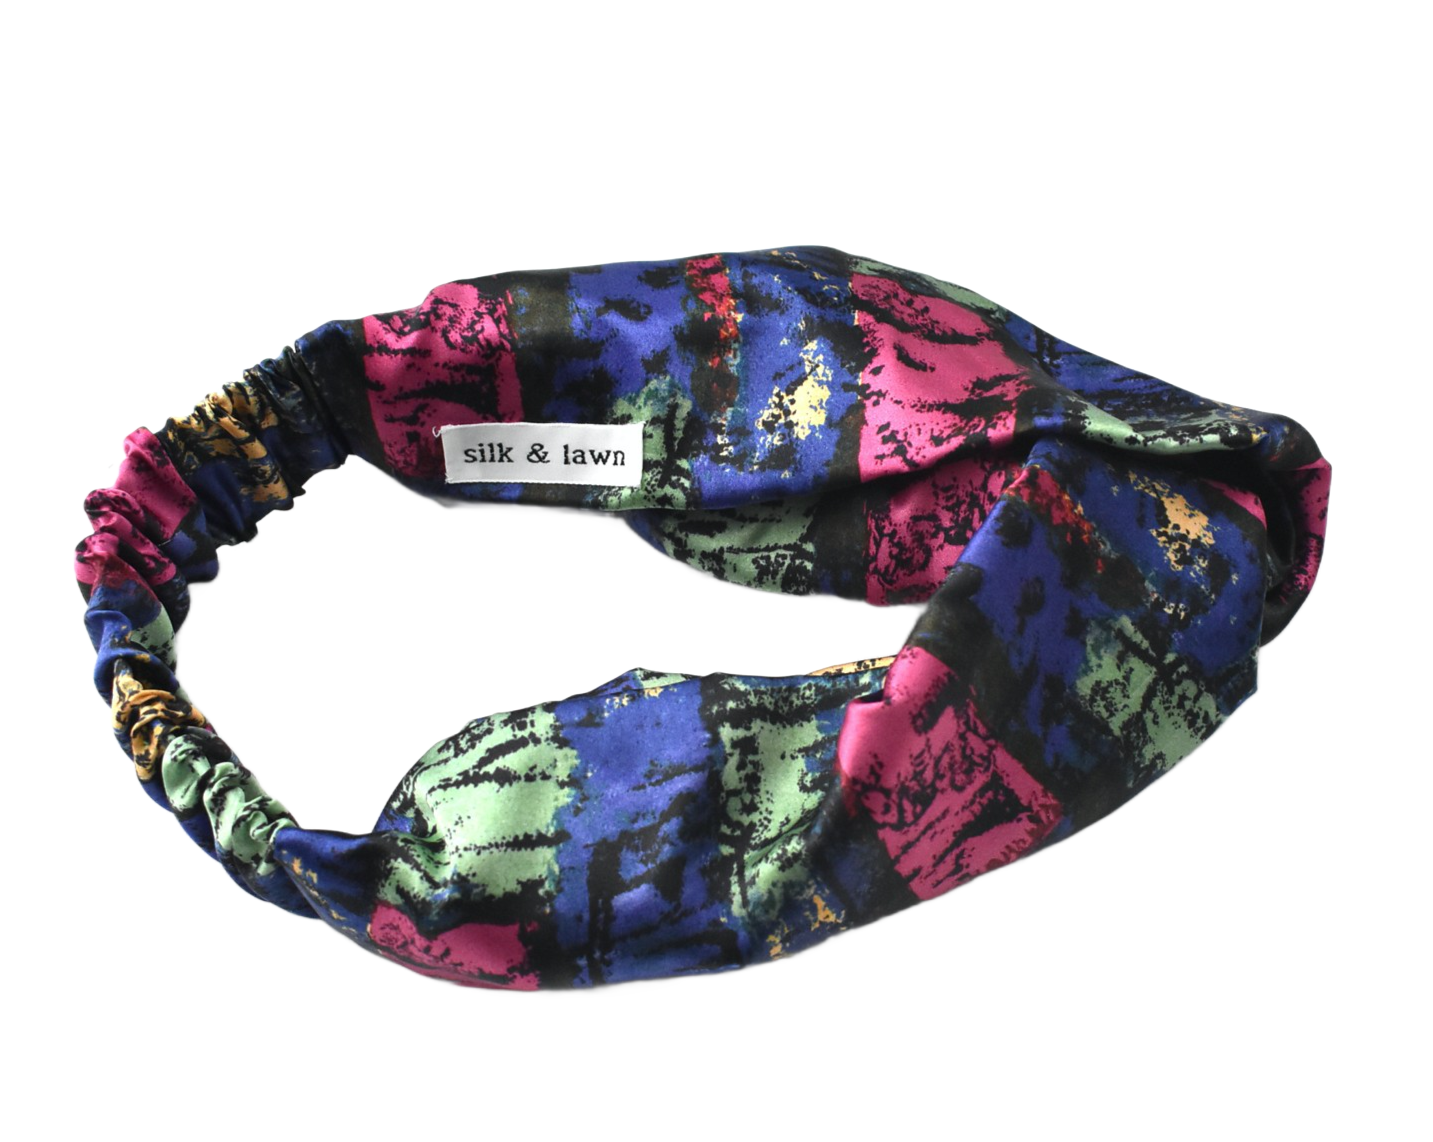 Silk Twisted Turban hairband and neck scarf in Liberty London Althea - Bright Graphic - 100% Silk-Satin